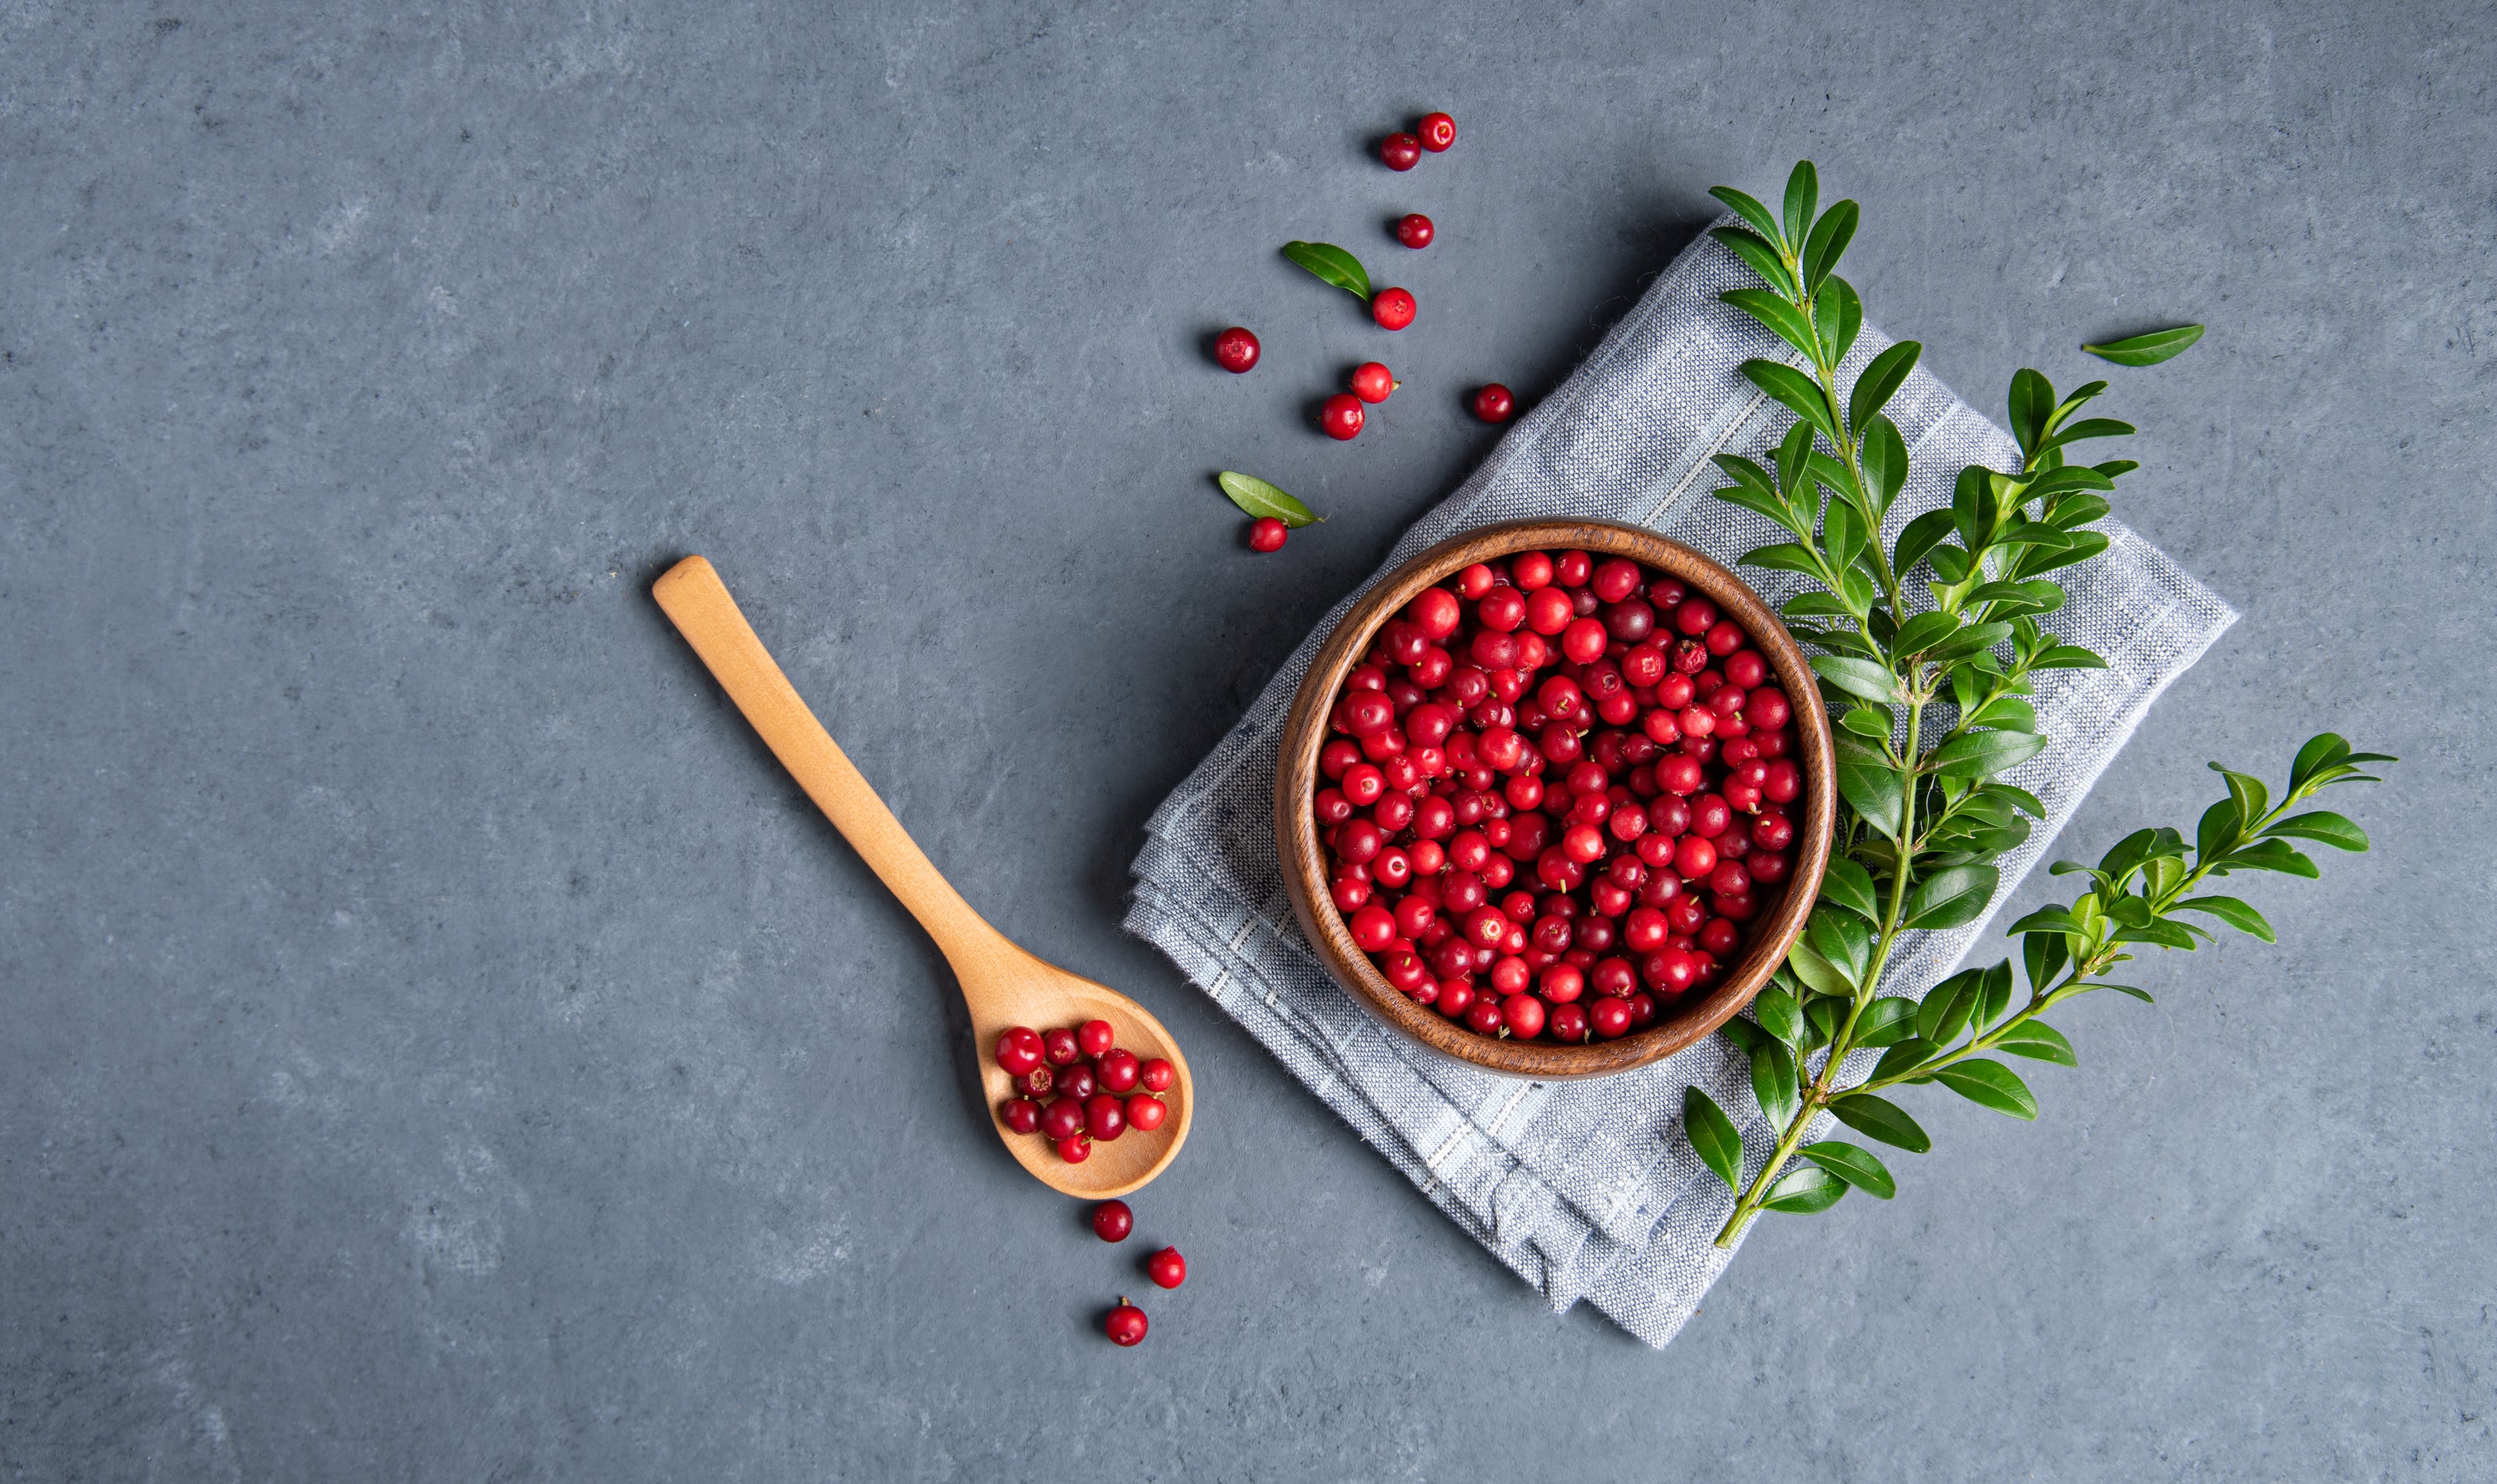 juicy-forest-lingonberry-in-a-wooden-bowl-with-s-2023-11-27-05-15-19-utc.jpg__PID:25d98830-6ea6-4dd0-b761-bce67d9546d7